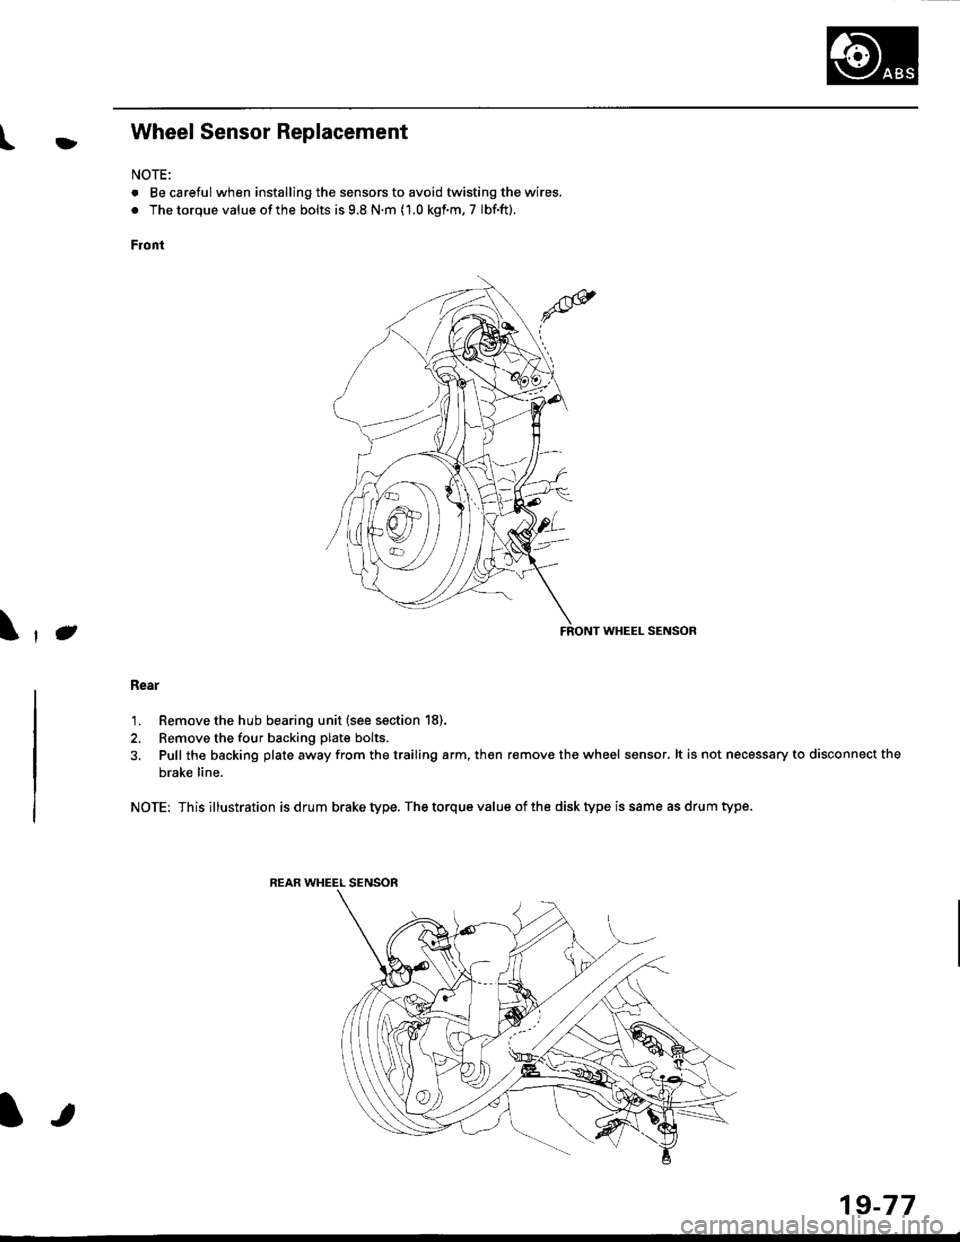 HONDA CIVIC 1996 6.G Owners Manual l}tWheel Sensor Replacement
NOTE:
. Becareful when installingthe sensors to avoid twisting the wires.
. The torque value of the bolts is 9.8 N.m (1.0 kgf.m, 7 lbf.ft).
Front
FRONT WHEEL SENSOR
Rear
1.